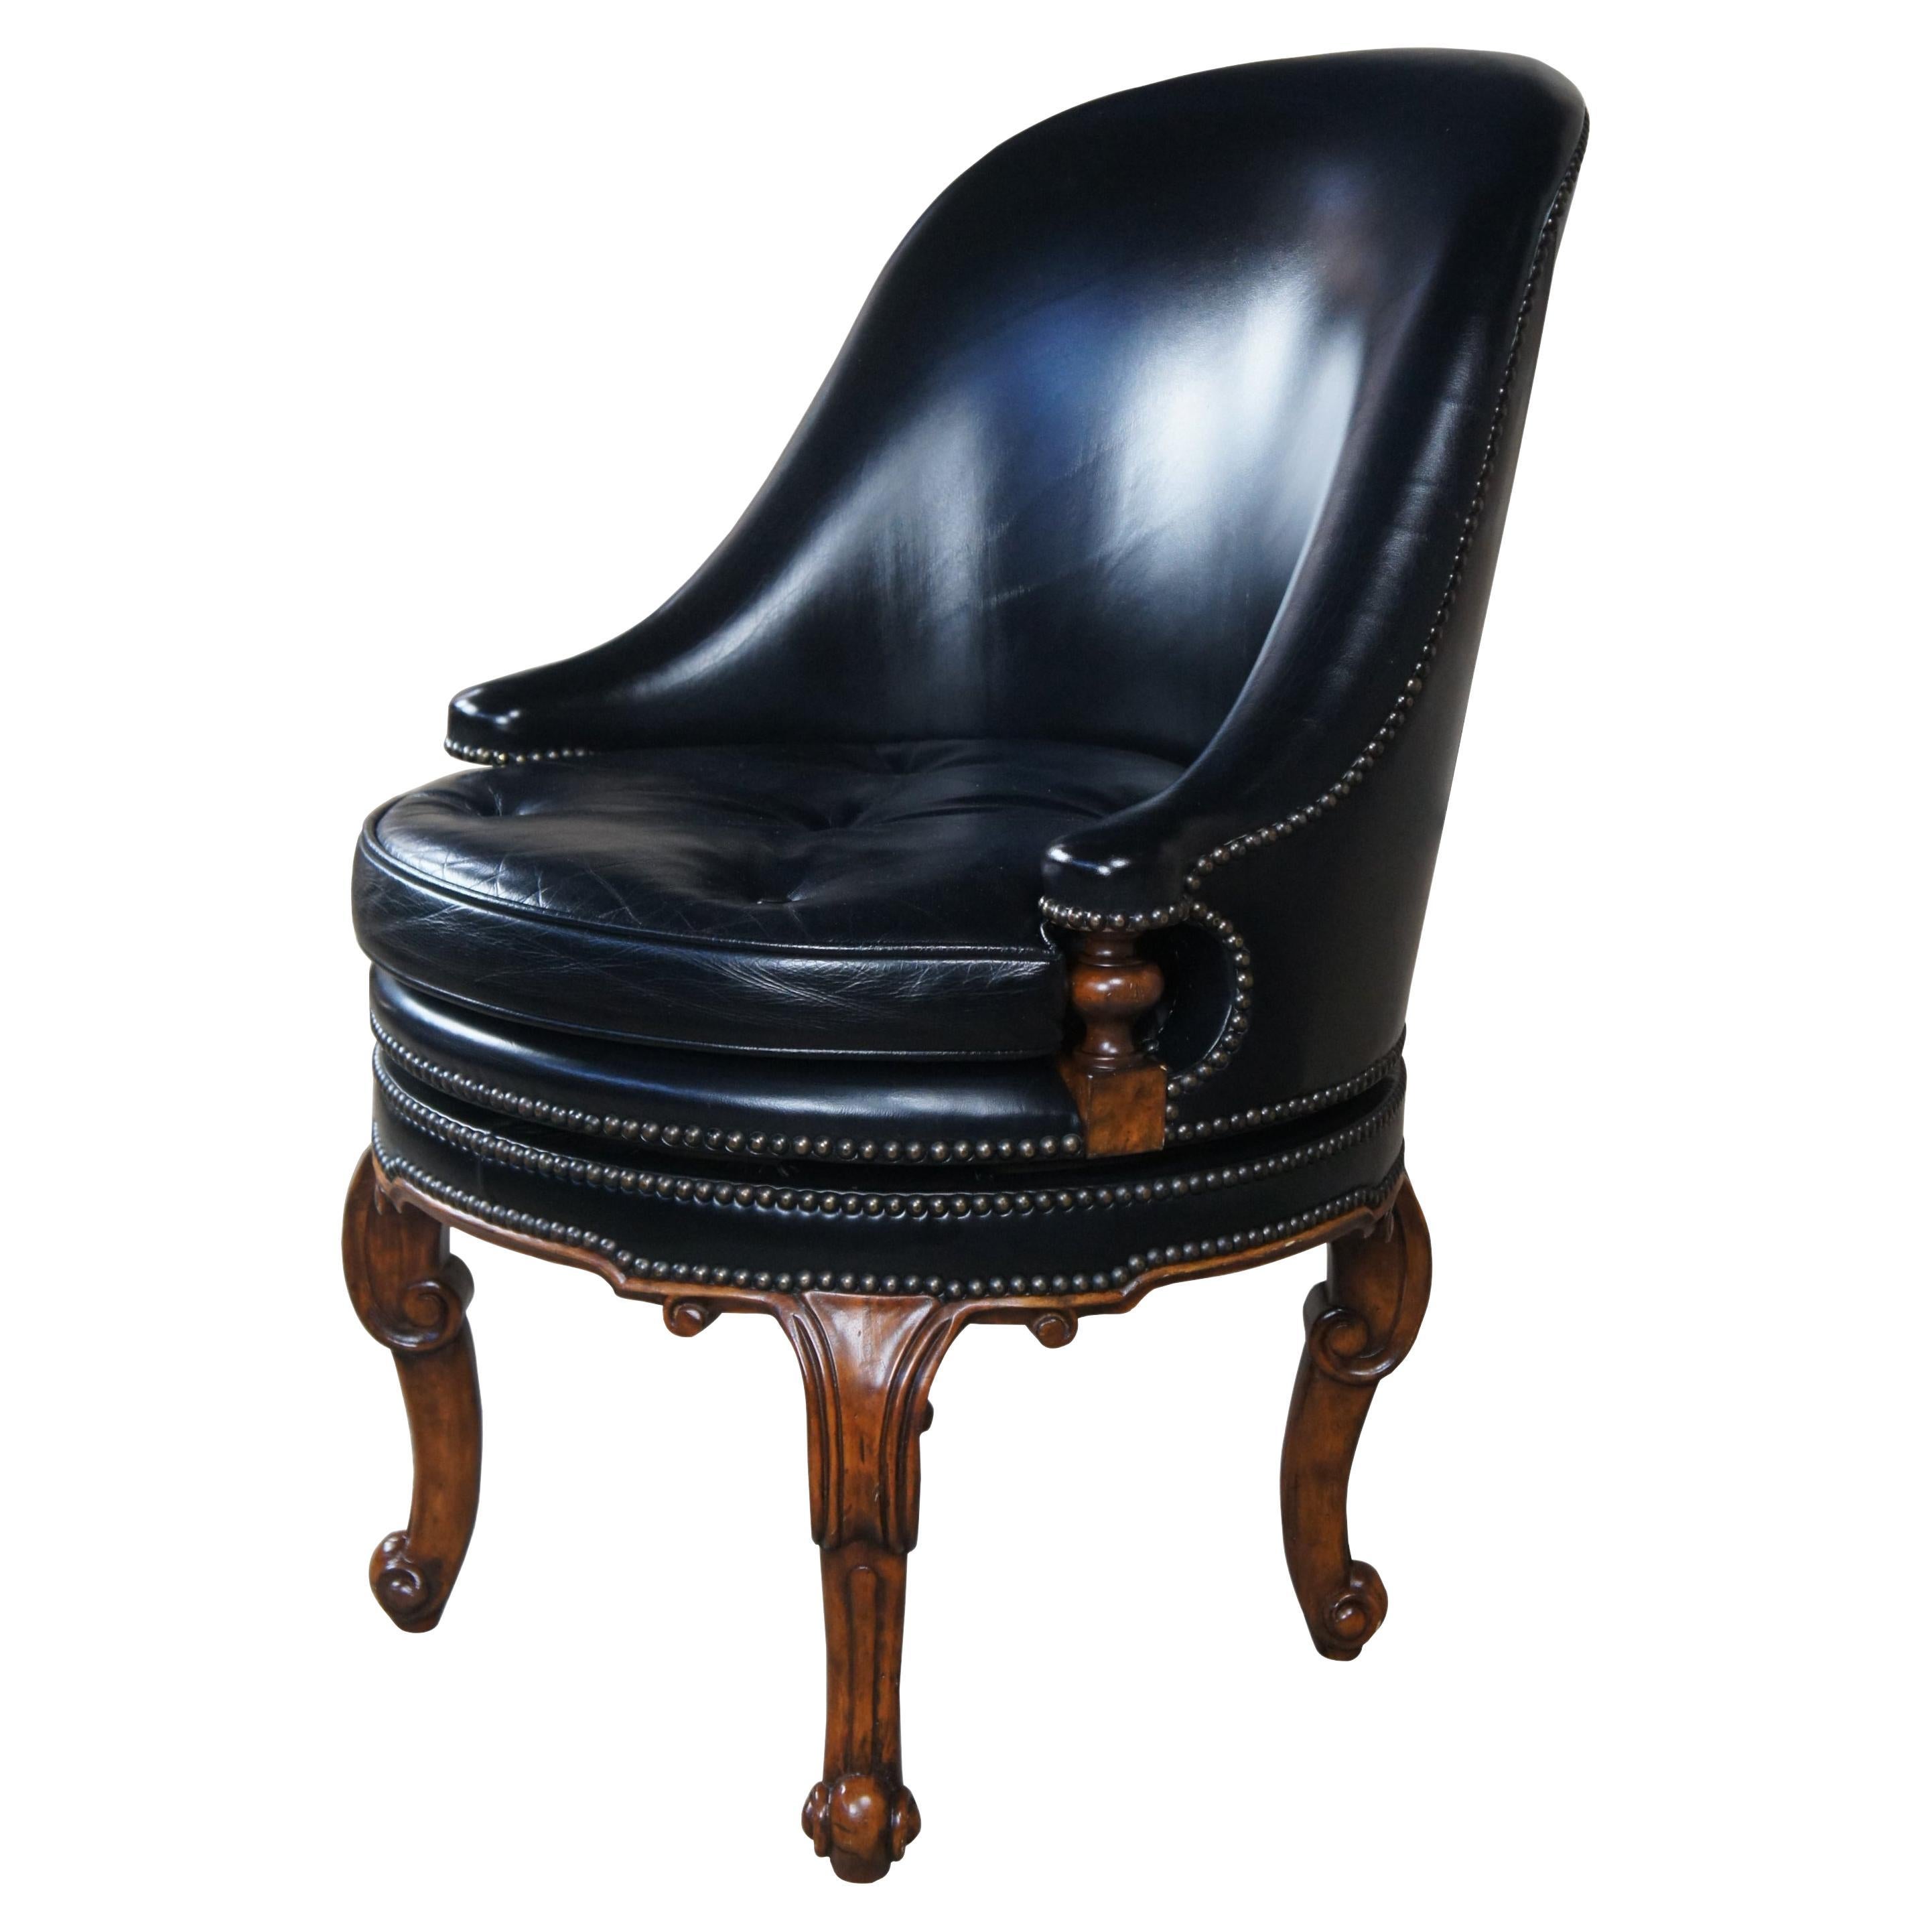 Maitland Smith Traditional Black Leather Spoon Back Swivel Game Desk Chair 4330